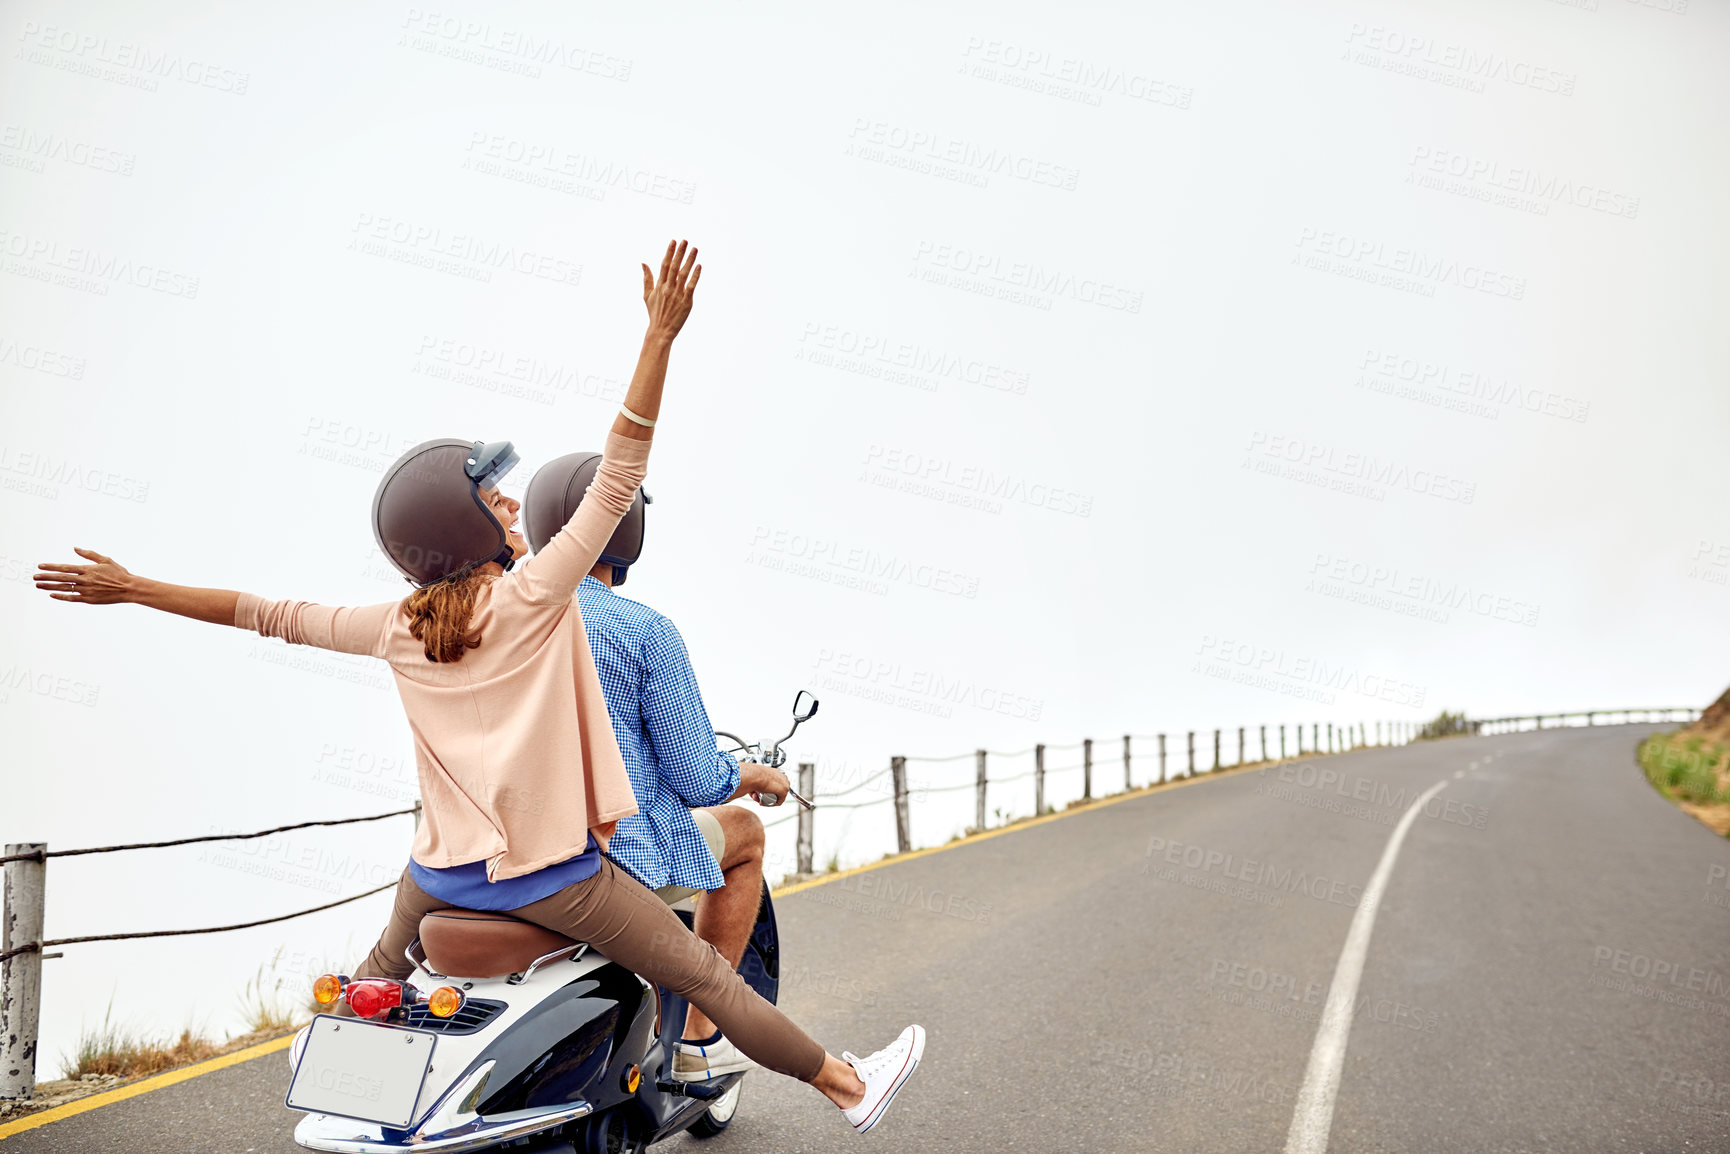 Buy stock photo Shot of an adventurous couple out for a ride on a motorbike